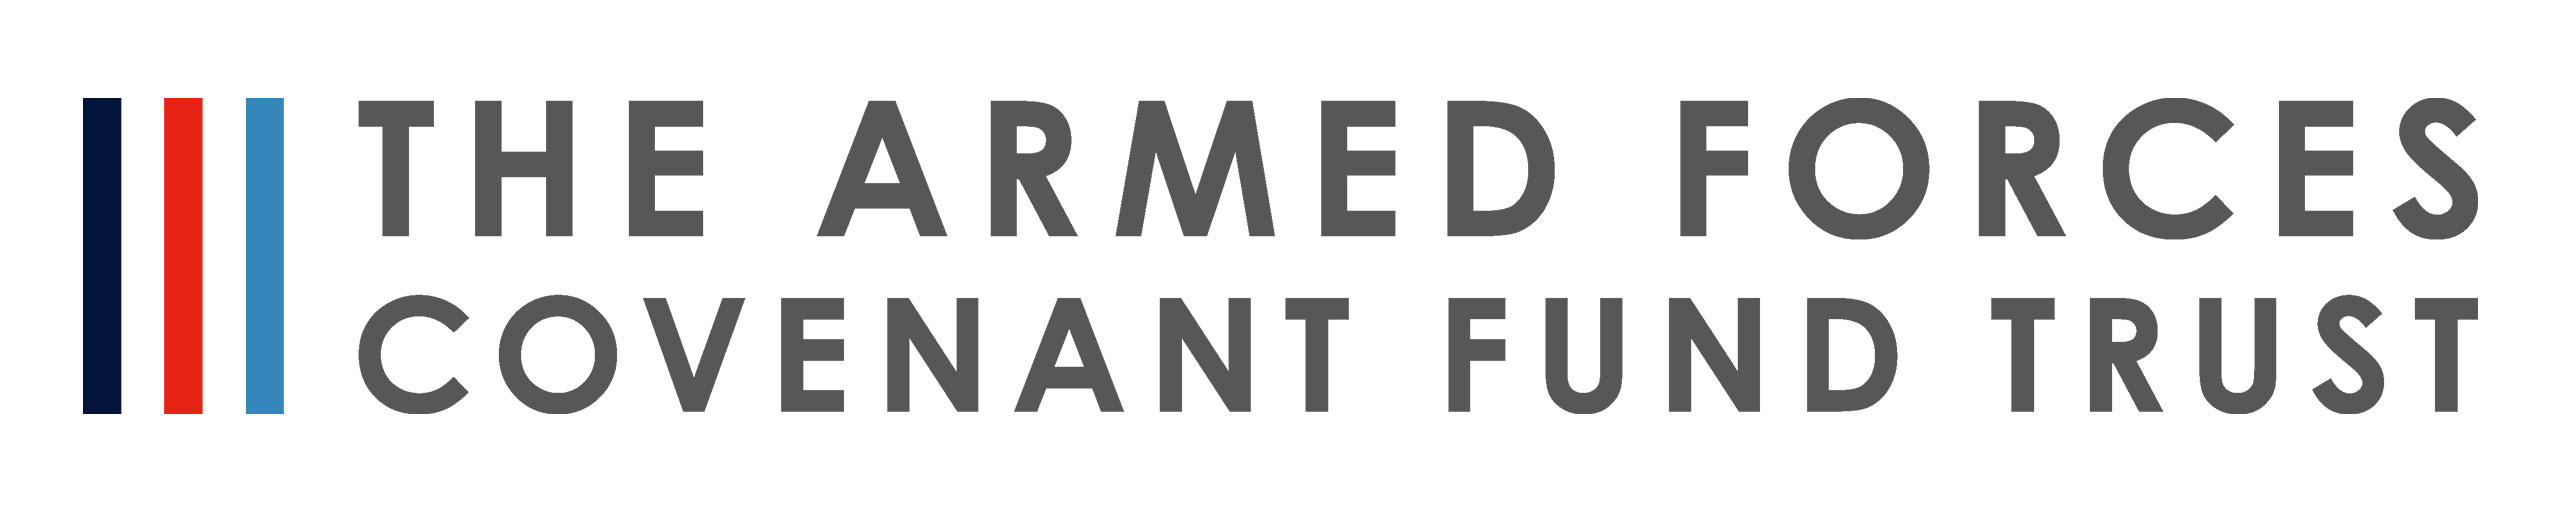 armed-forces-covenant-fund-trust-logo-banner